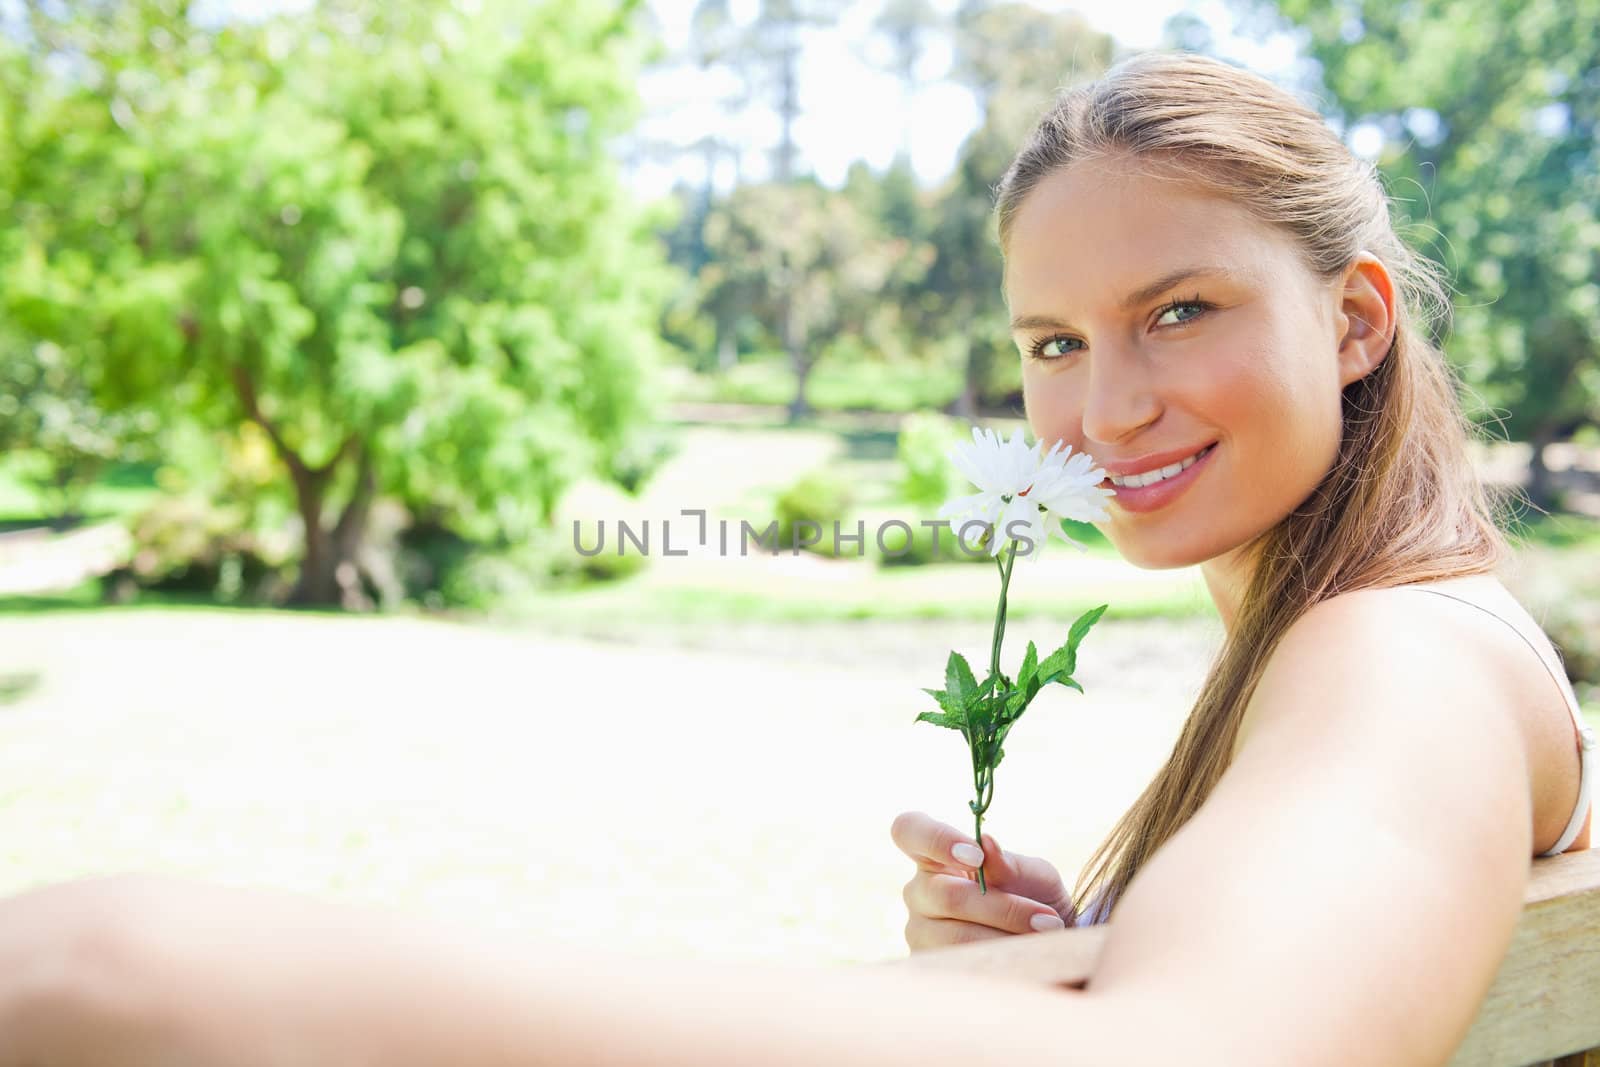 Side view of a smiling woman smelling a flower in the park by Wavebreakmedia